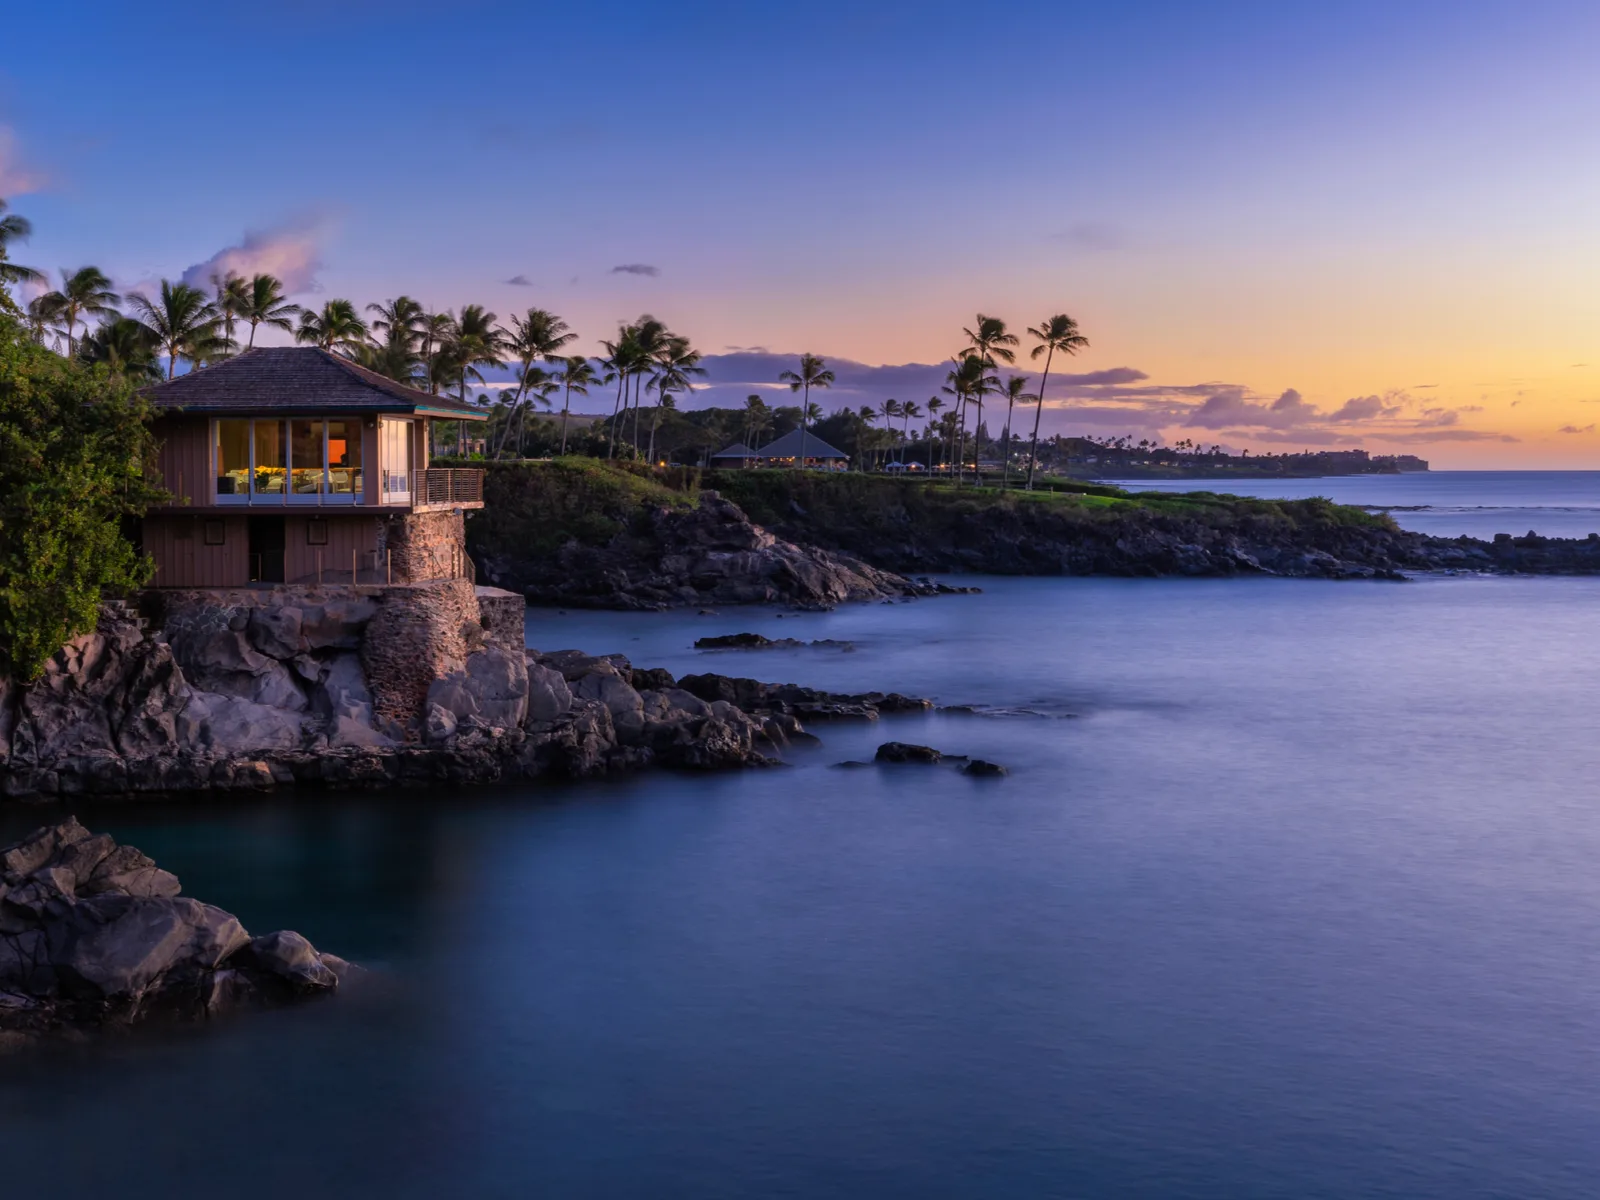 Sunset cliff on house for a piece on the best hotels in Maui